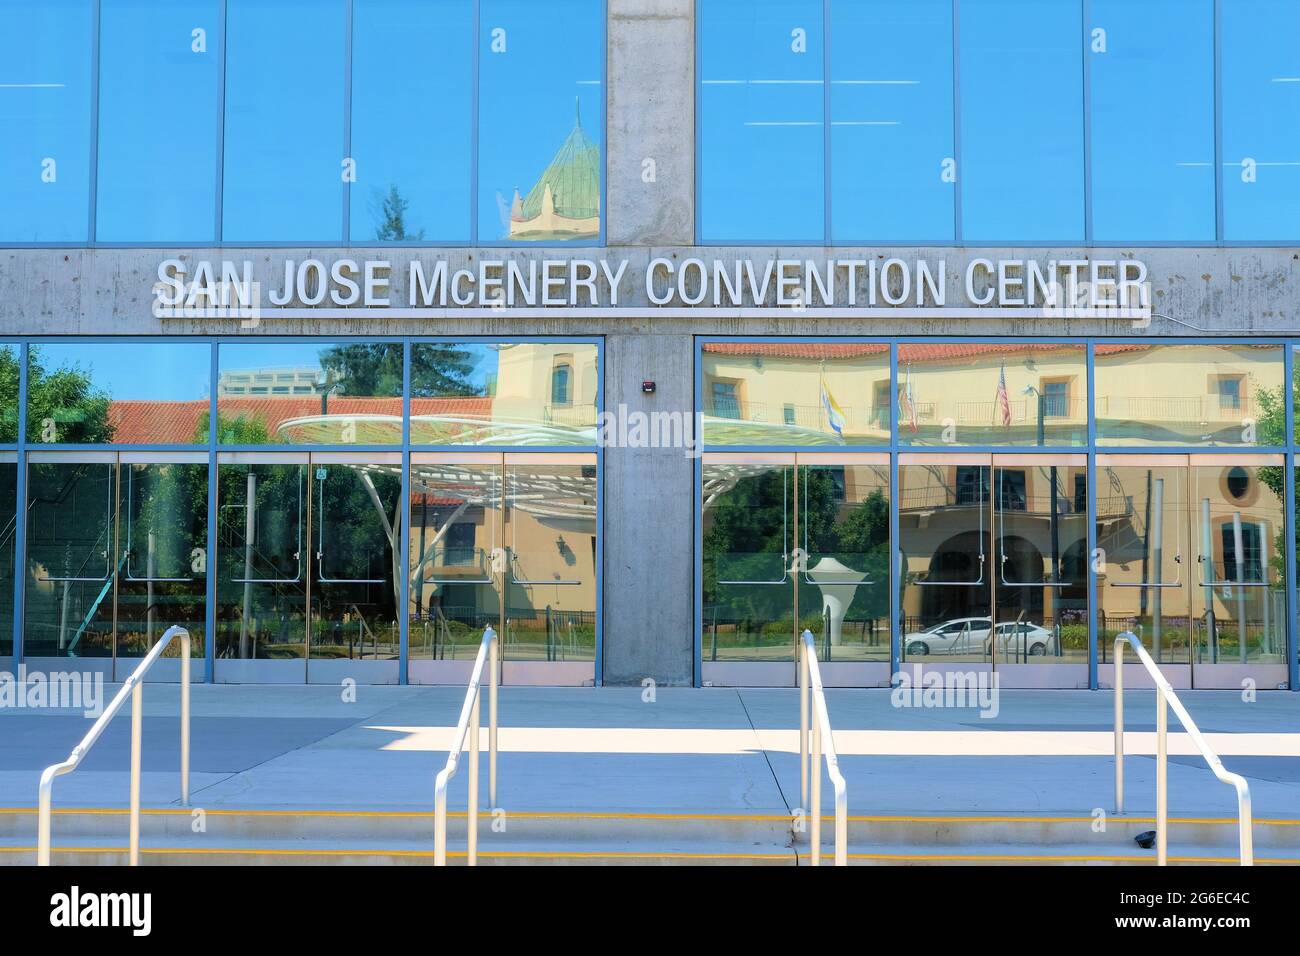 Exterior sign above the main entrance to The San Jose McEnery Convention Center, first opened in 1989, in downtown San Jose, California. Stock Photo